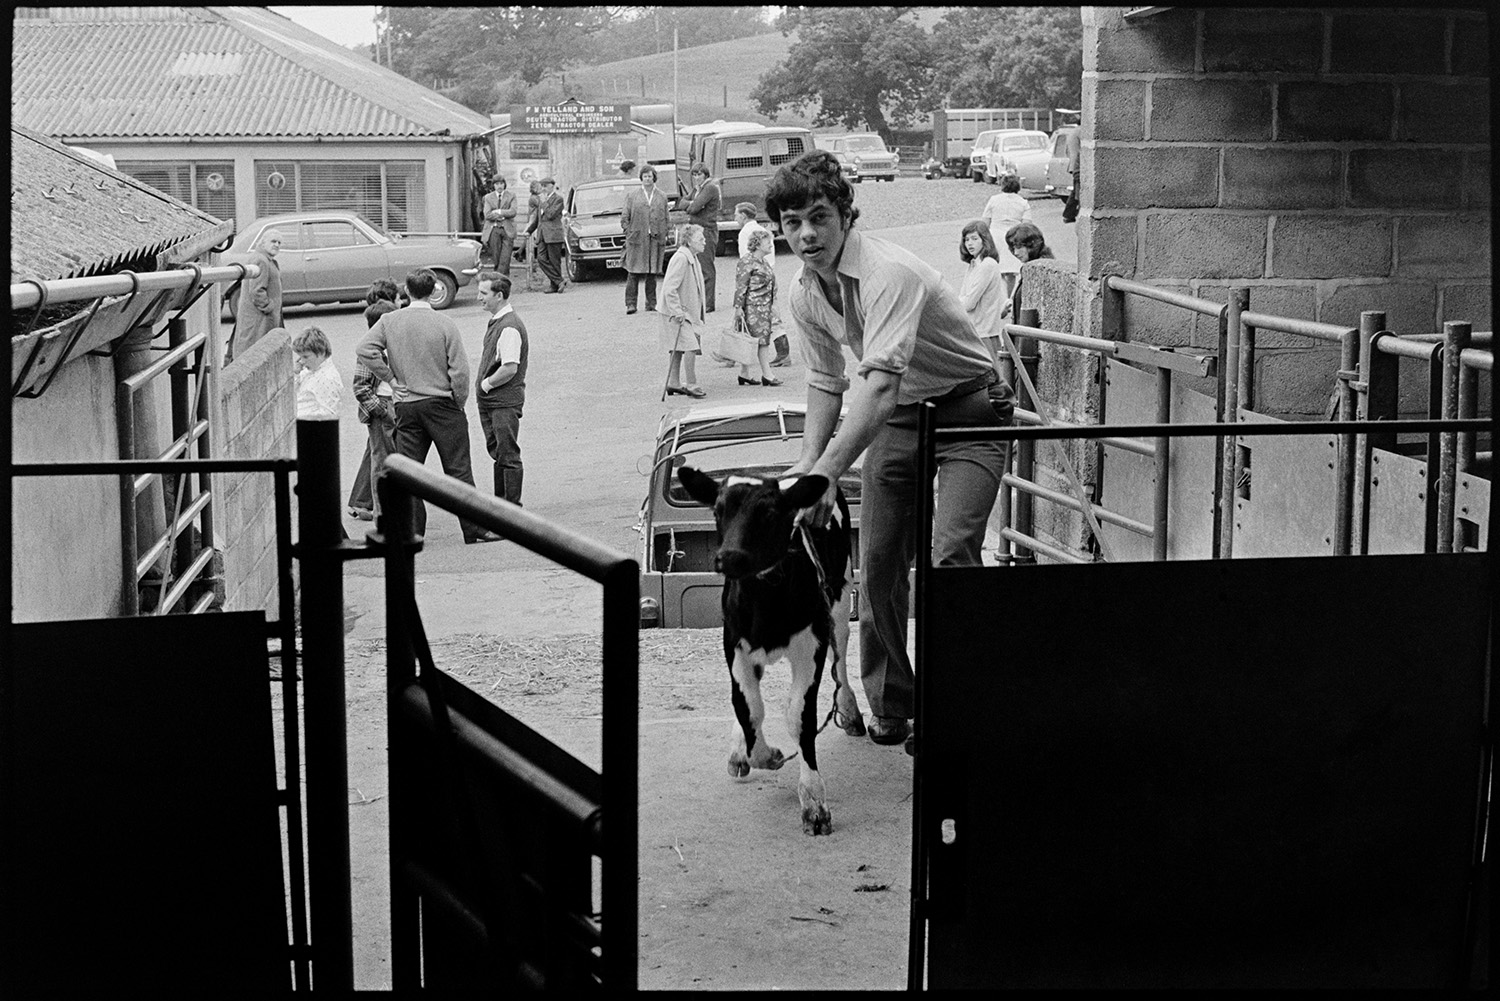 Taking calves to market in pickup van, calves in pens and Auctioneer. 
[David Ward taking a calf into Hatherleigh market to be sold. Parked cars and people are visible outside the market.]